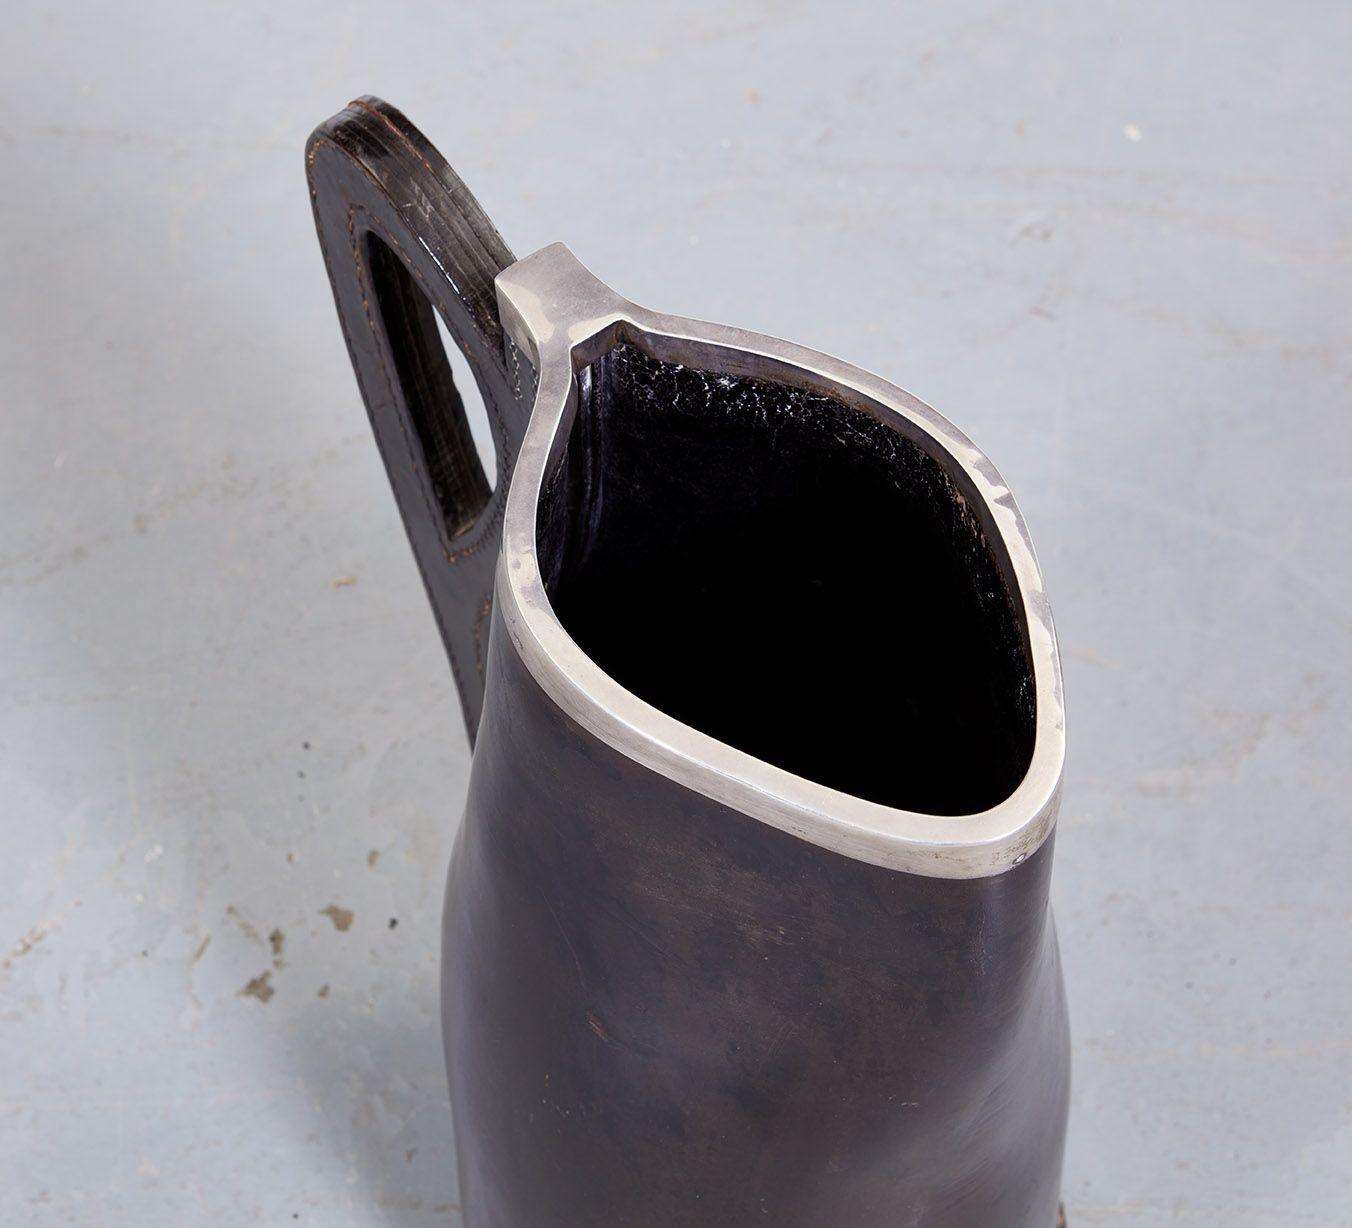 A sophisticated pitcher made of a continuous piece of patinated leather hide (with a stitched bottom piece) fastened with a thick stitched leather handle and bearing in this piece a substantial hallmarked silver rim.  Wonderful organic shape, and a